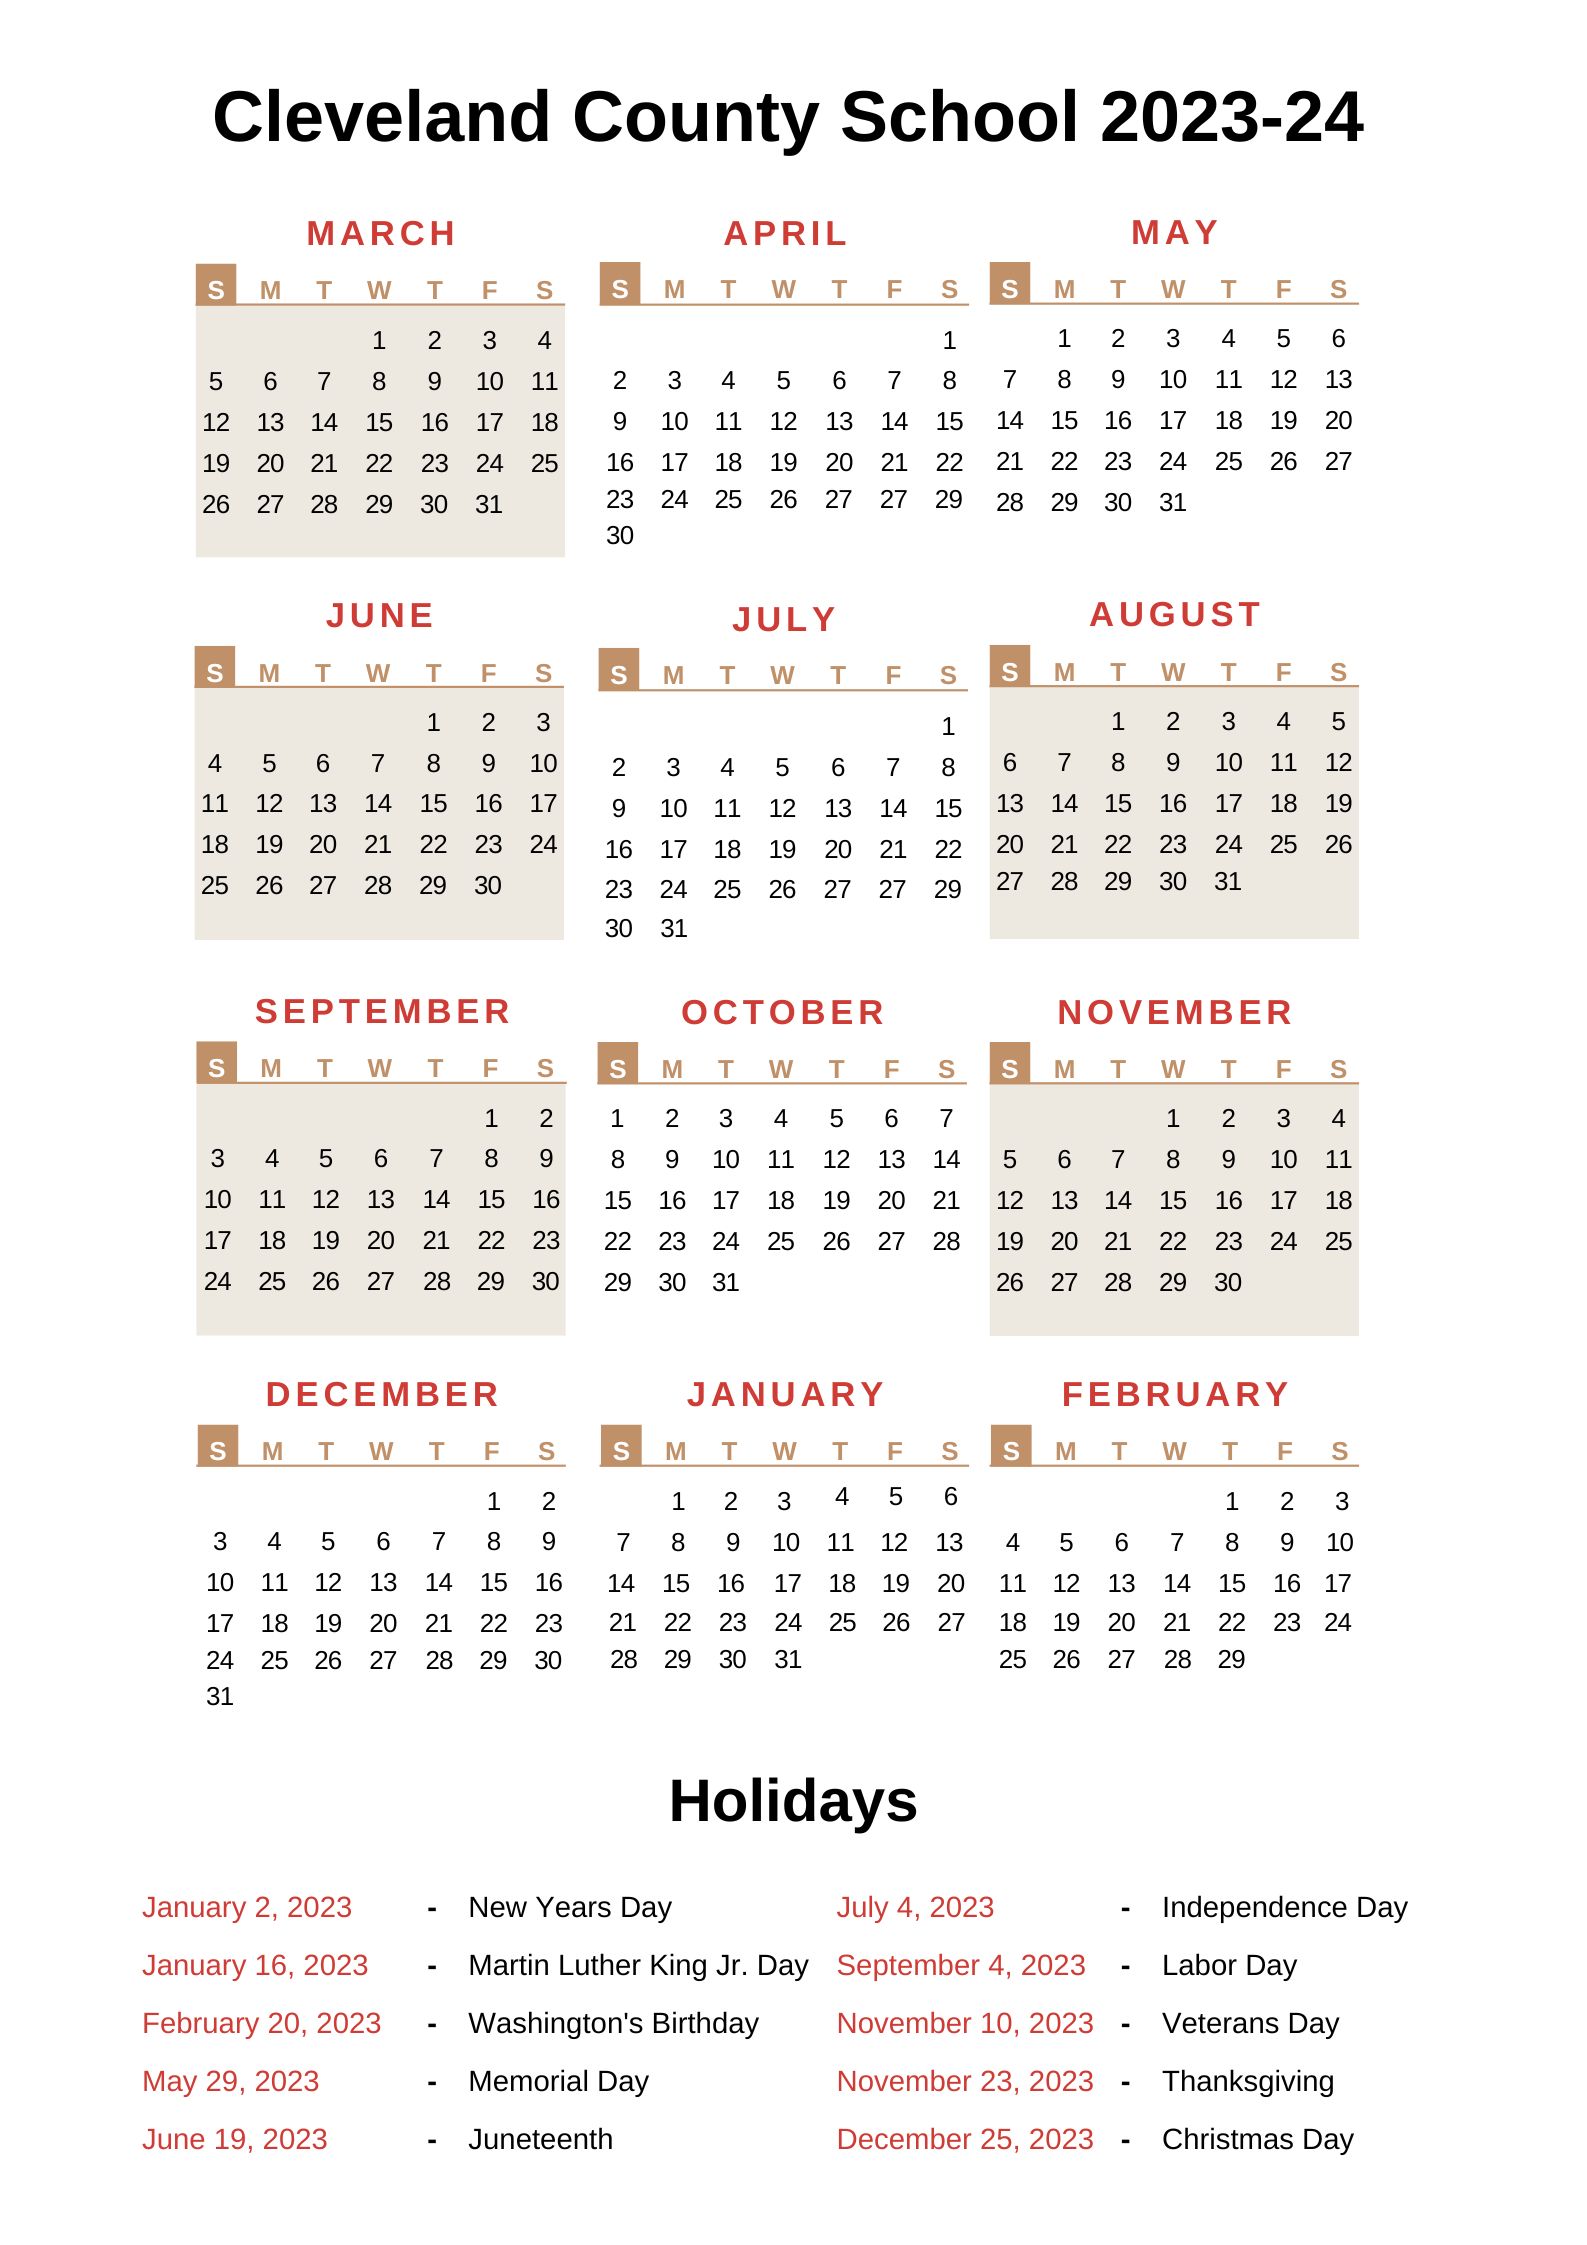 Cleveland County Schools Calendar 202324 With Holidays